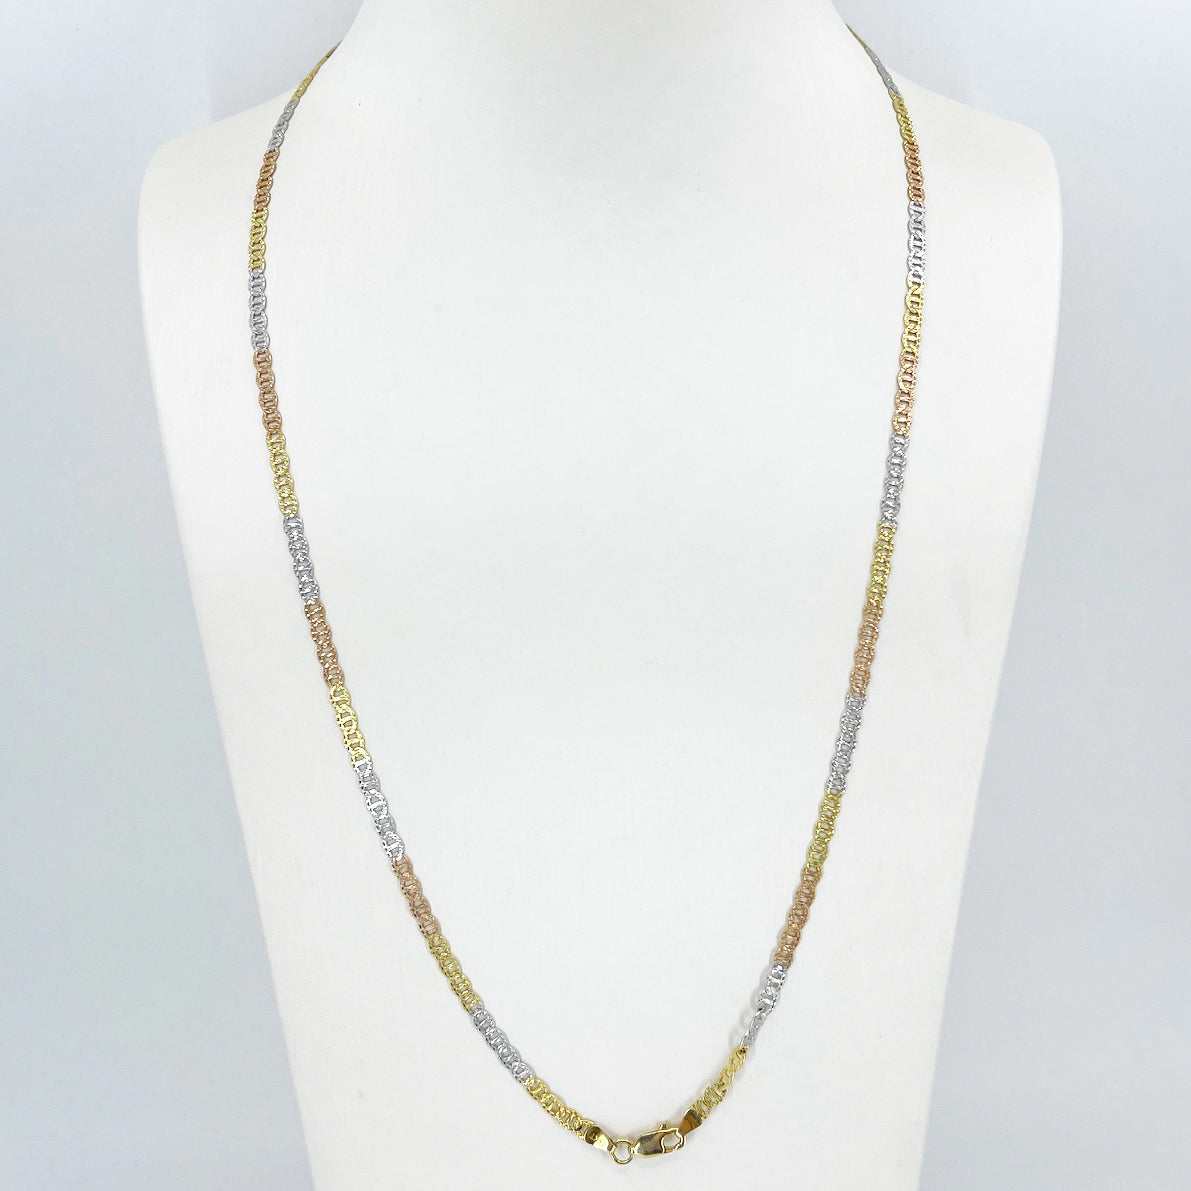 14K Solid Tri-Color Gold Flat Link Chain 24" 8.5 Grams